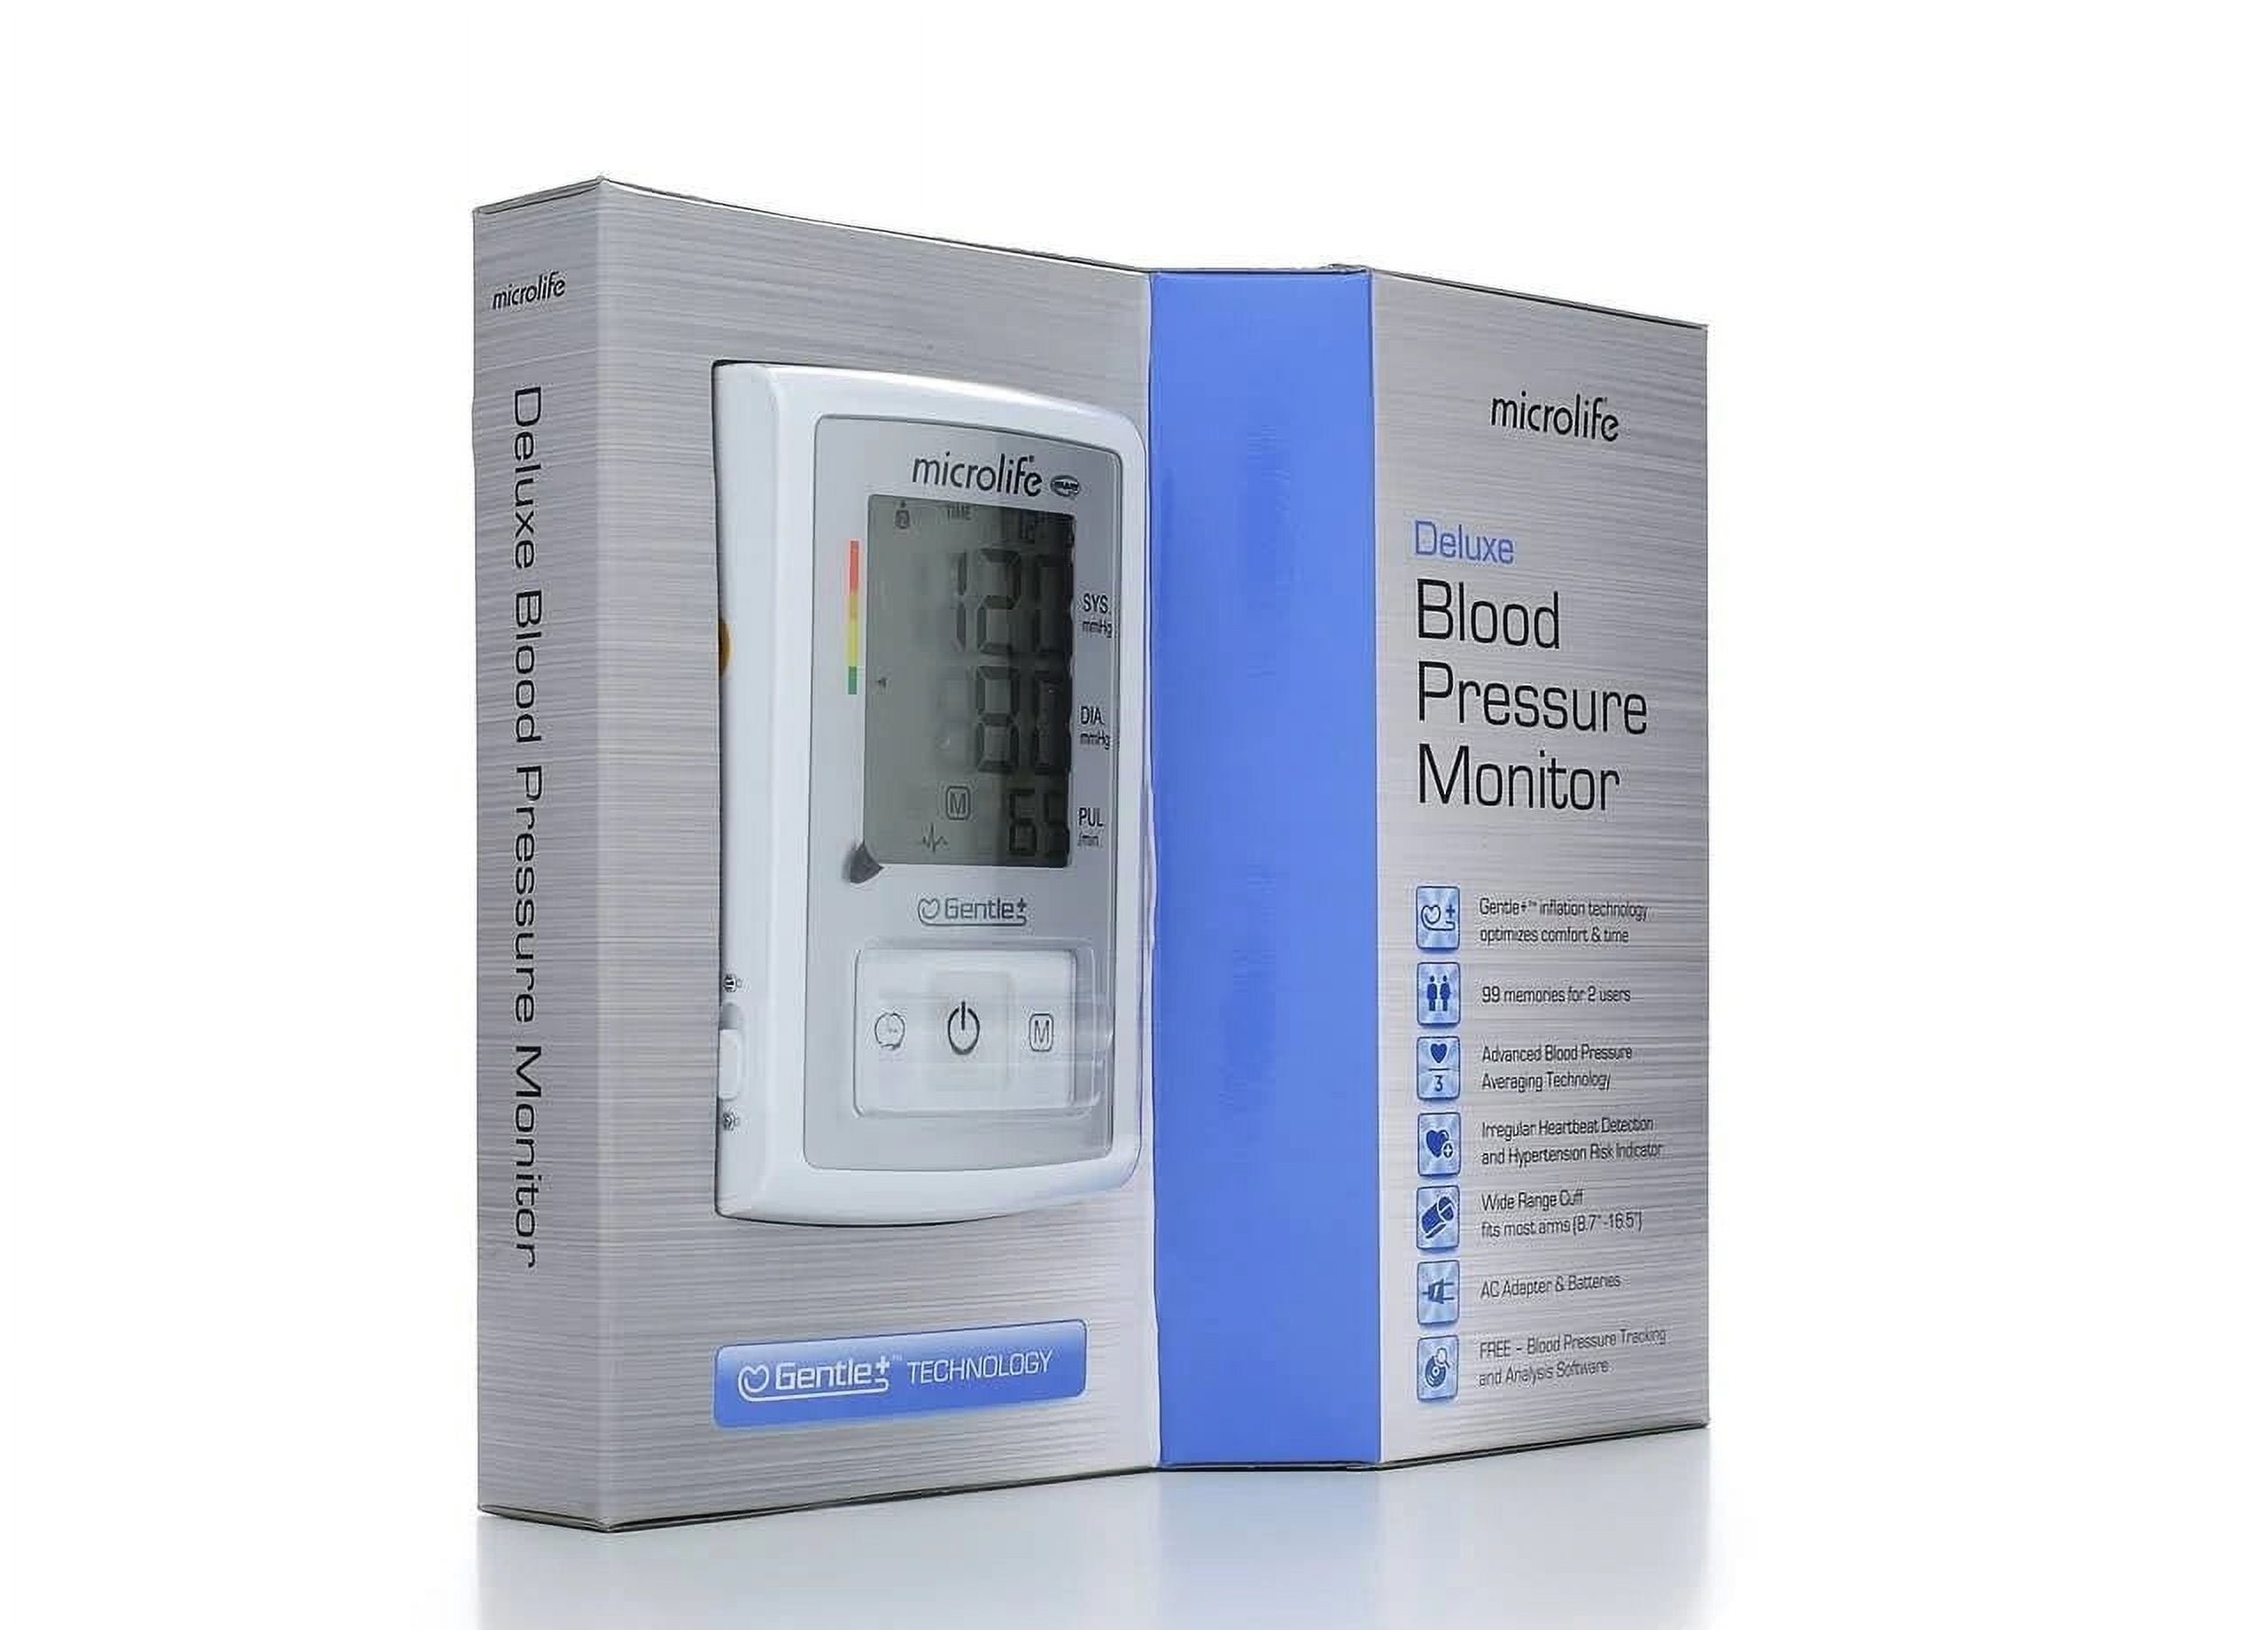 Microlife Premium BP3GX1-5A (Costco exclusive) Blood Pressure Monitor  Review - Consumer Reports